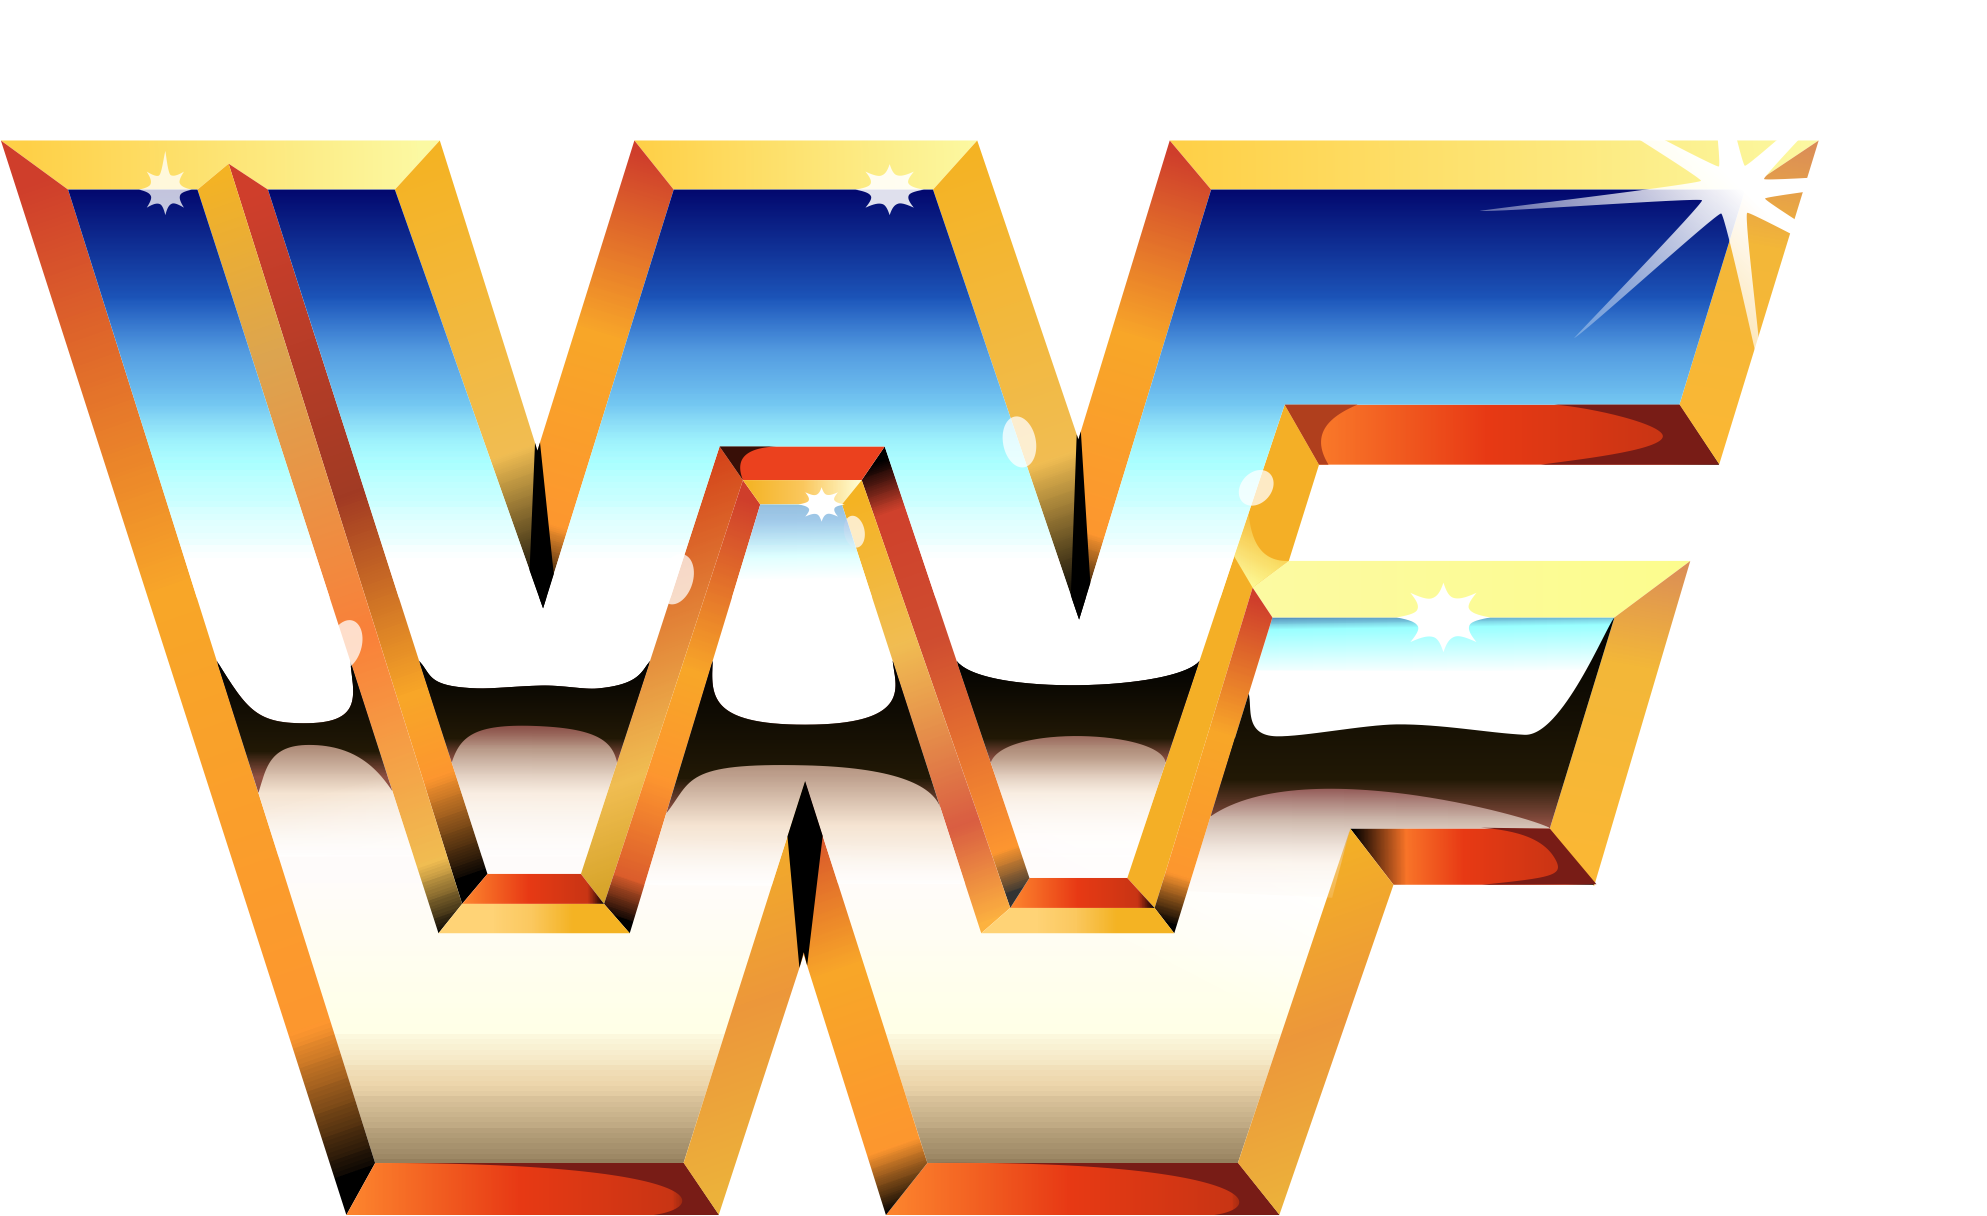 Download Wwe Wrestling Logo   Old School Wwf Logo   Full Size Png Pluspng.com  - Wwf, Transparent background PNG HD thumbnail